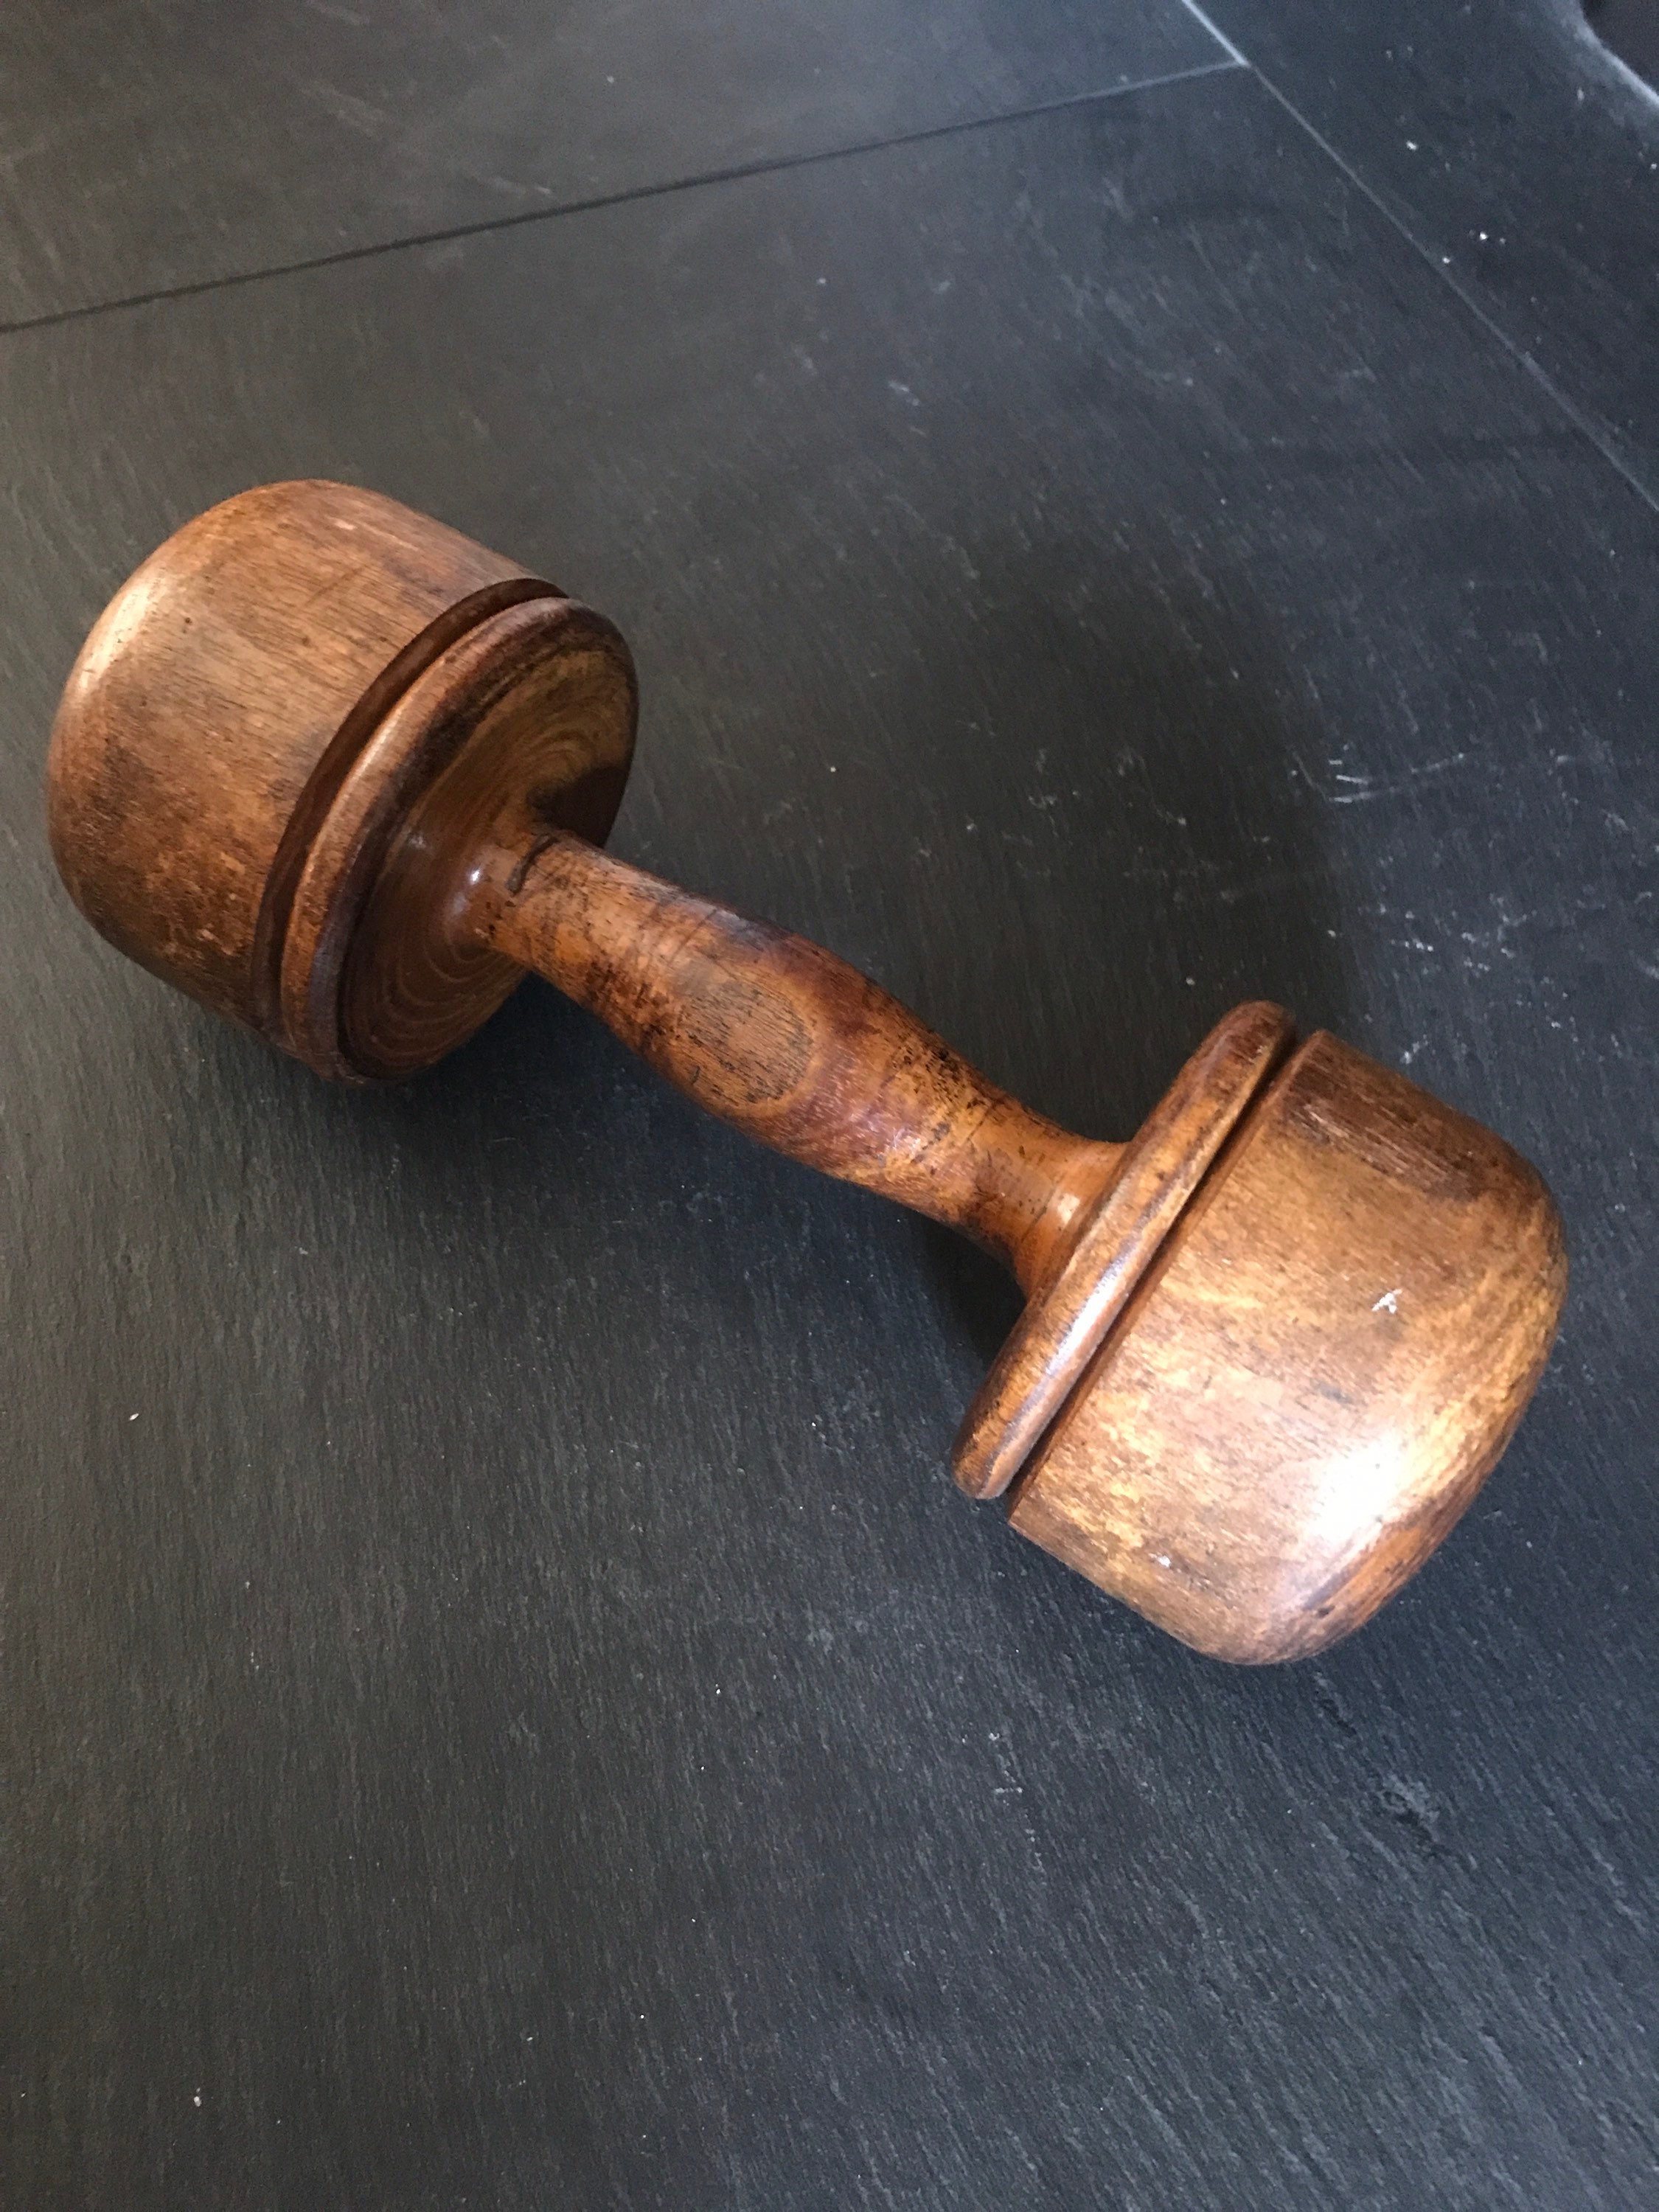 Treen　Etsy　Antique　日本　kg　Weight　Wooden　2.8　Hand　Gym